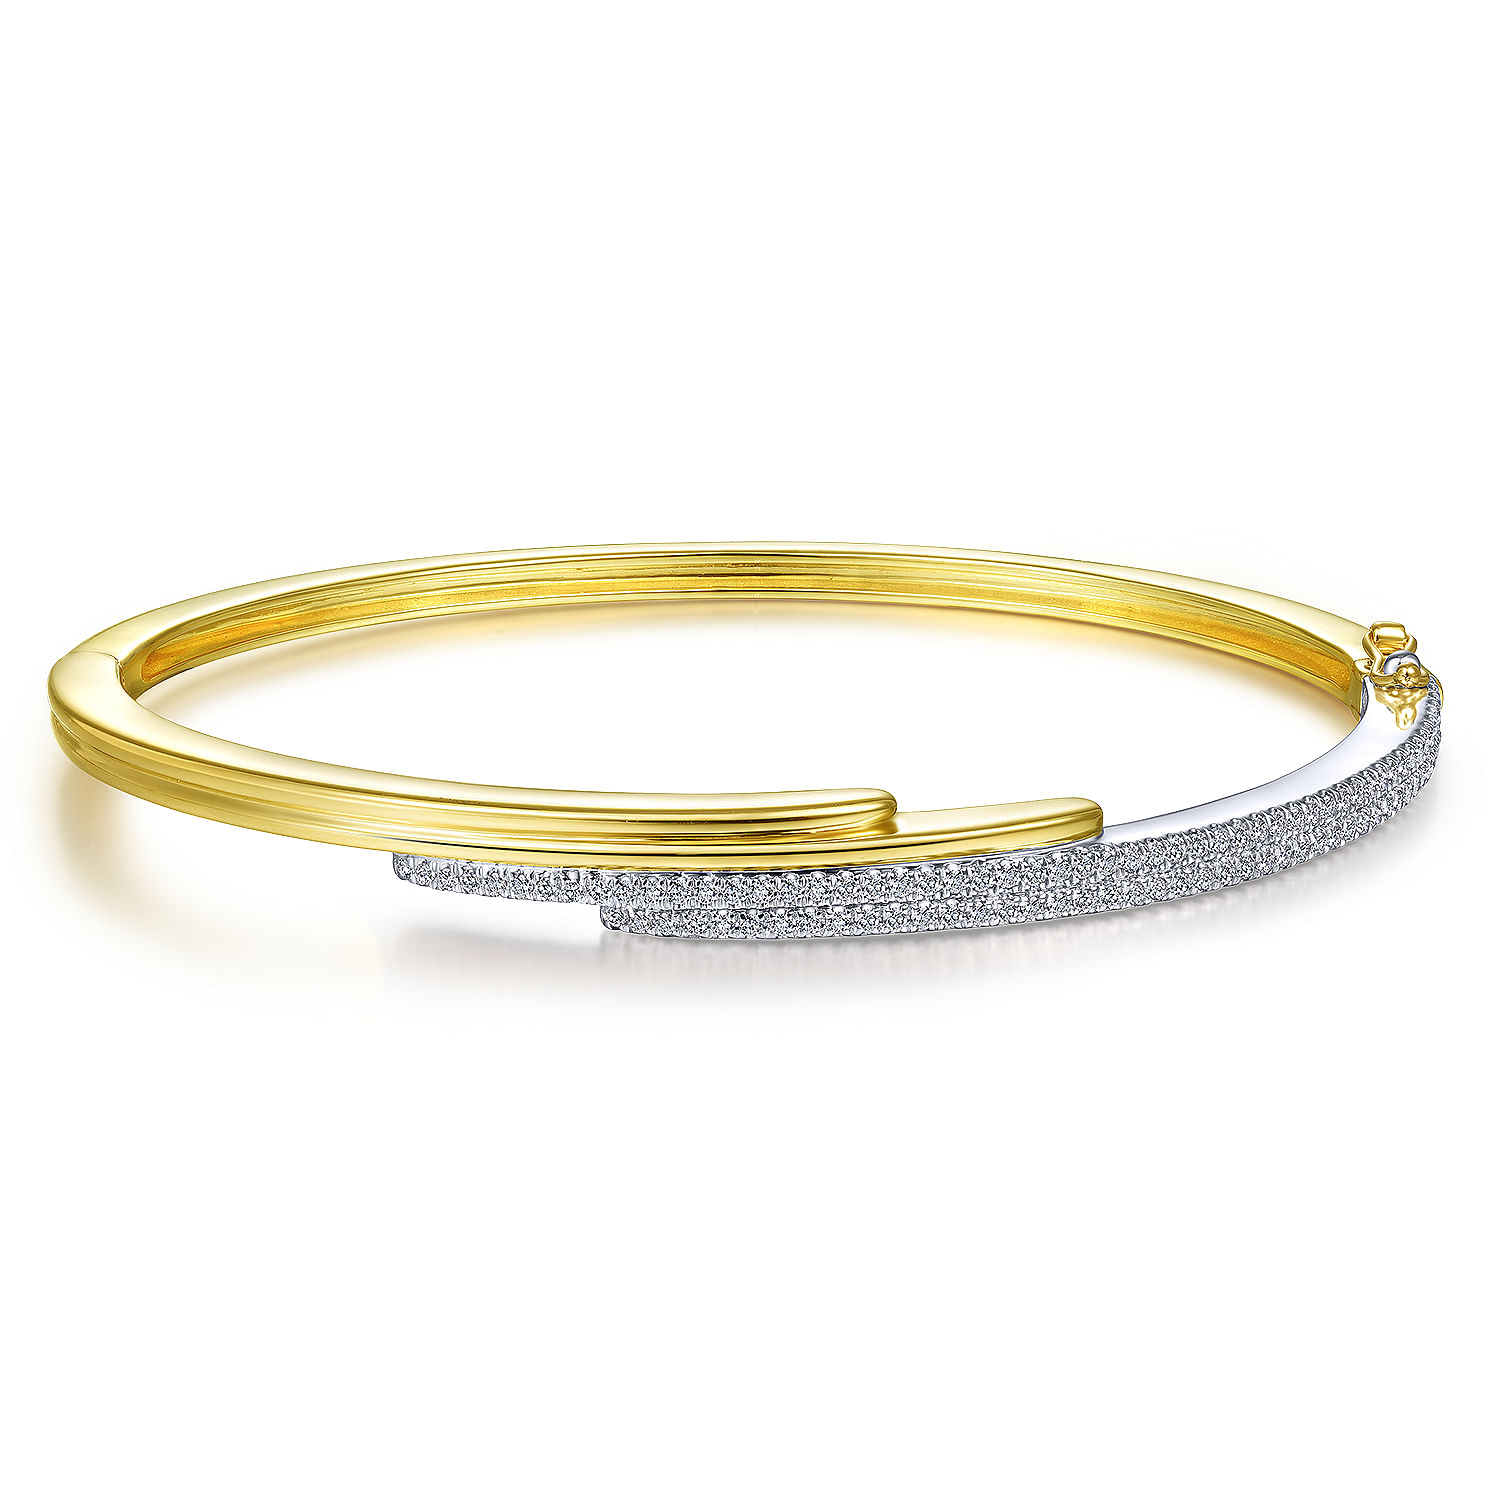 14K Yellow and White Gold Bypass Bangle with Diamonds